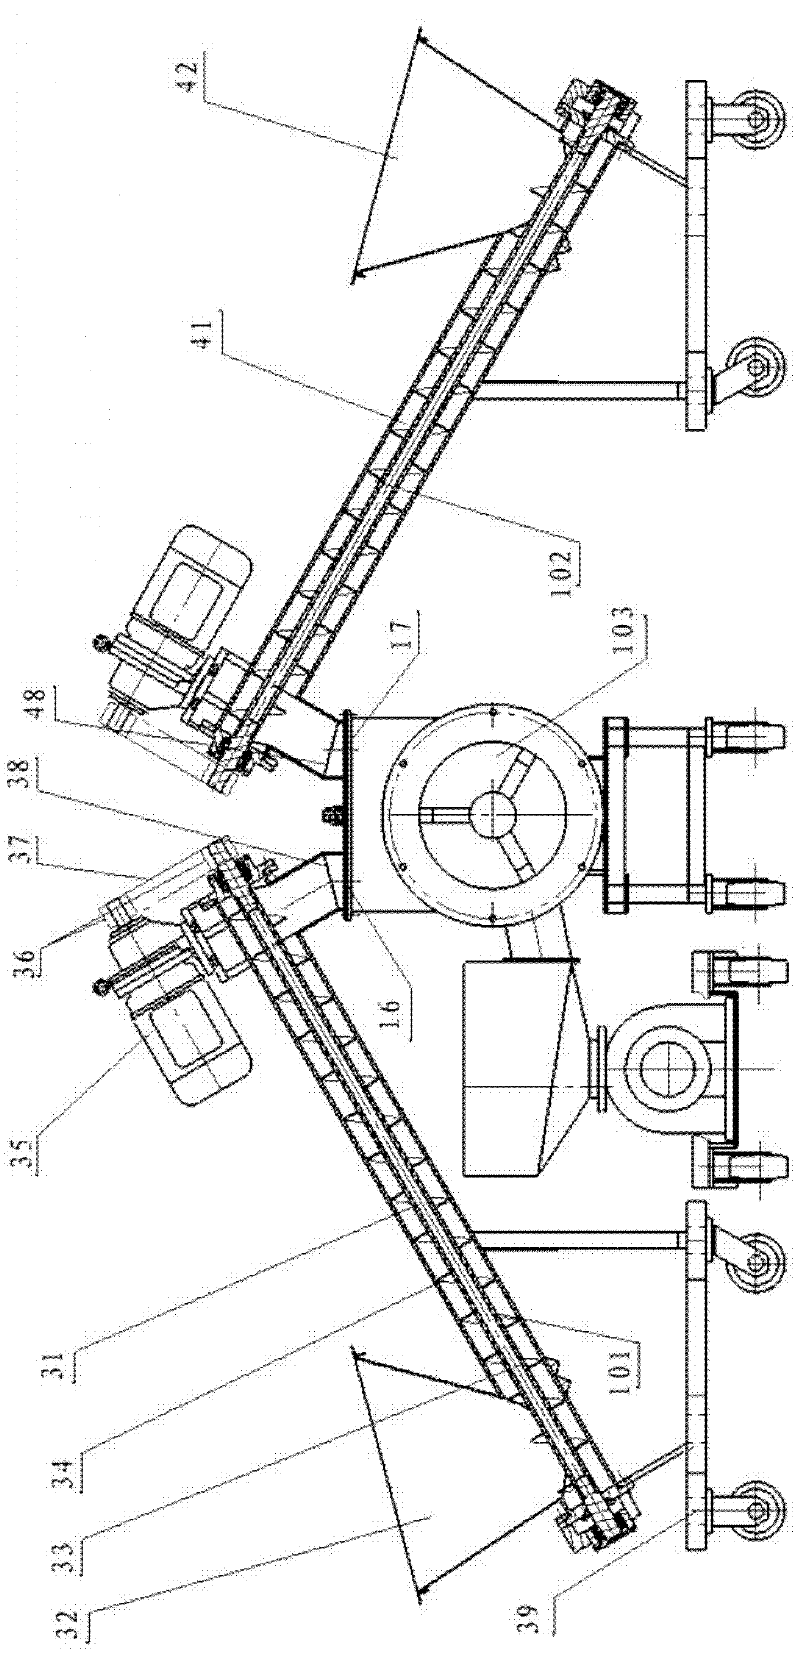 On-line production method and device of composite foamed slurry